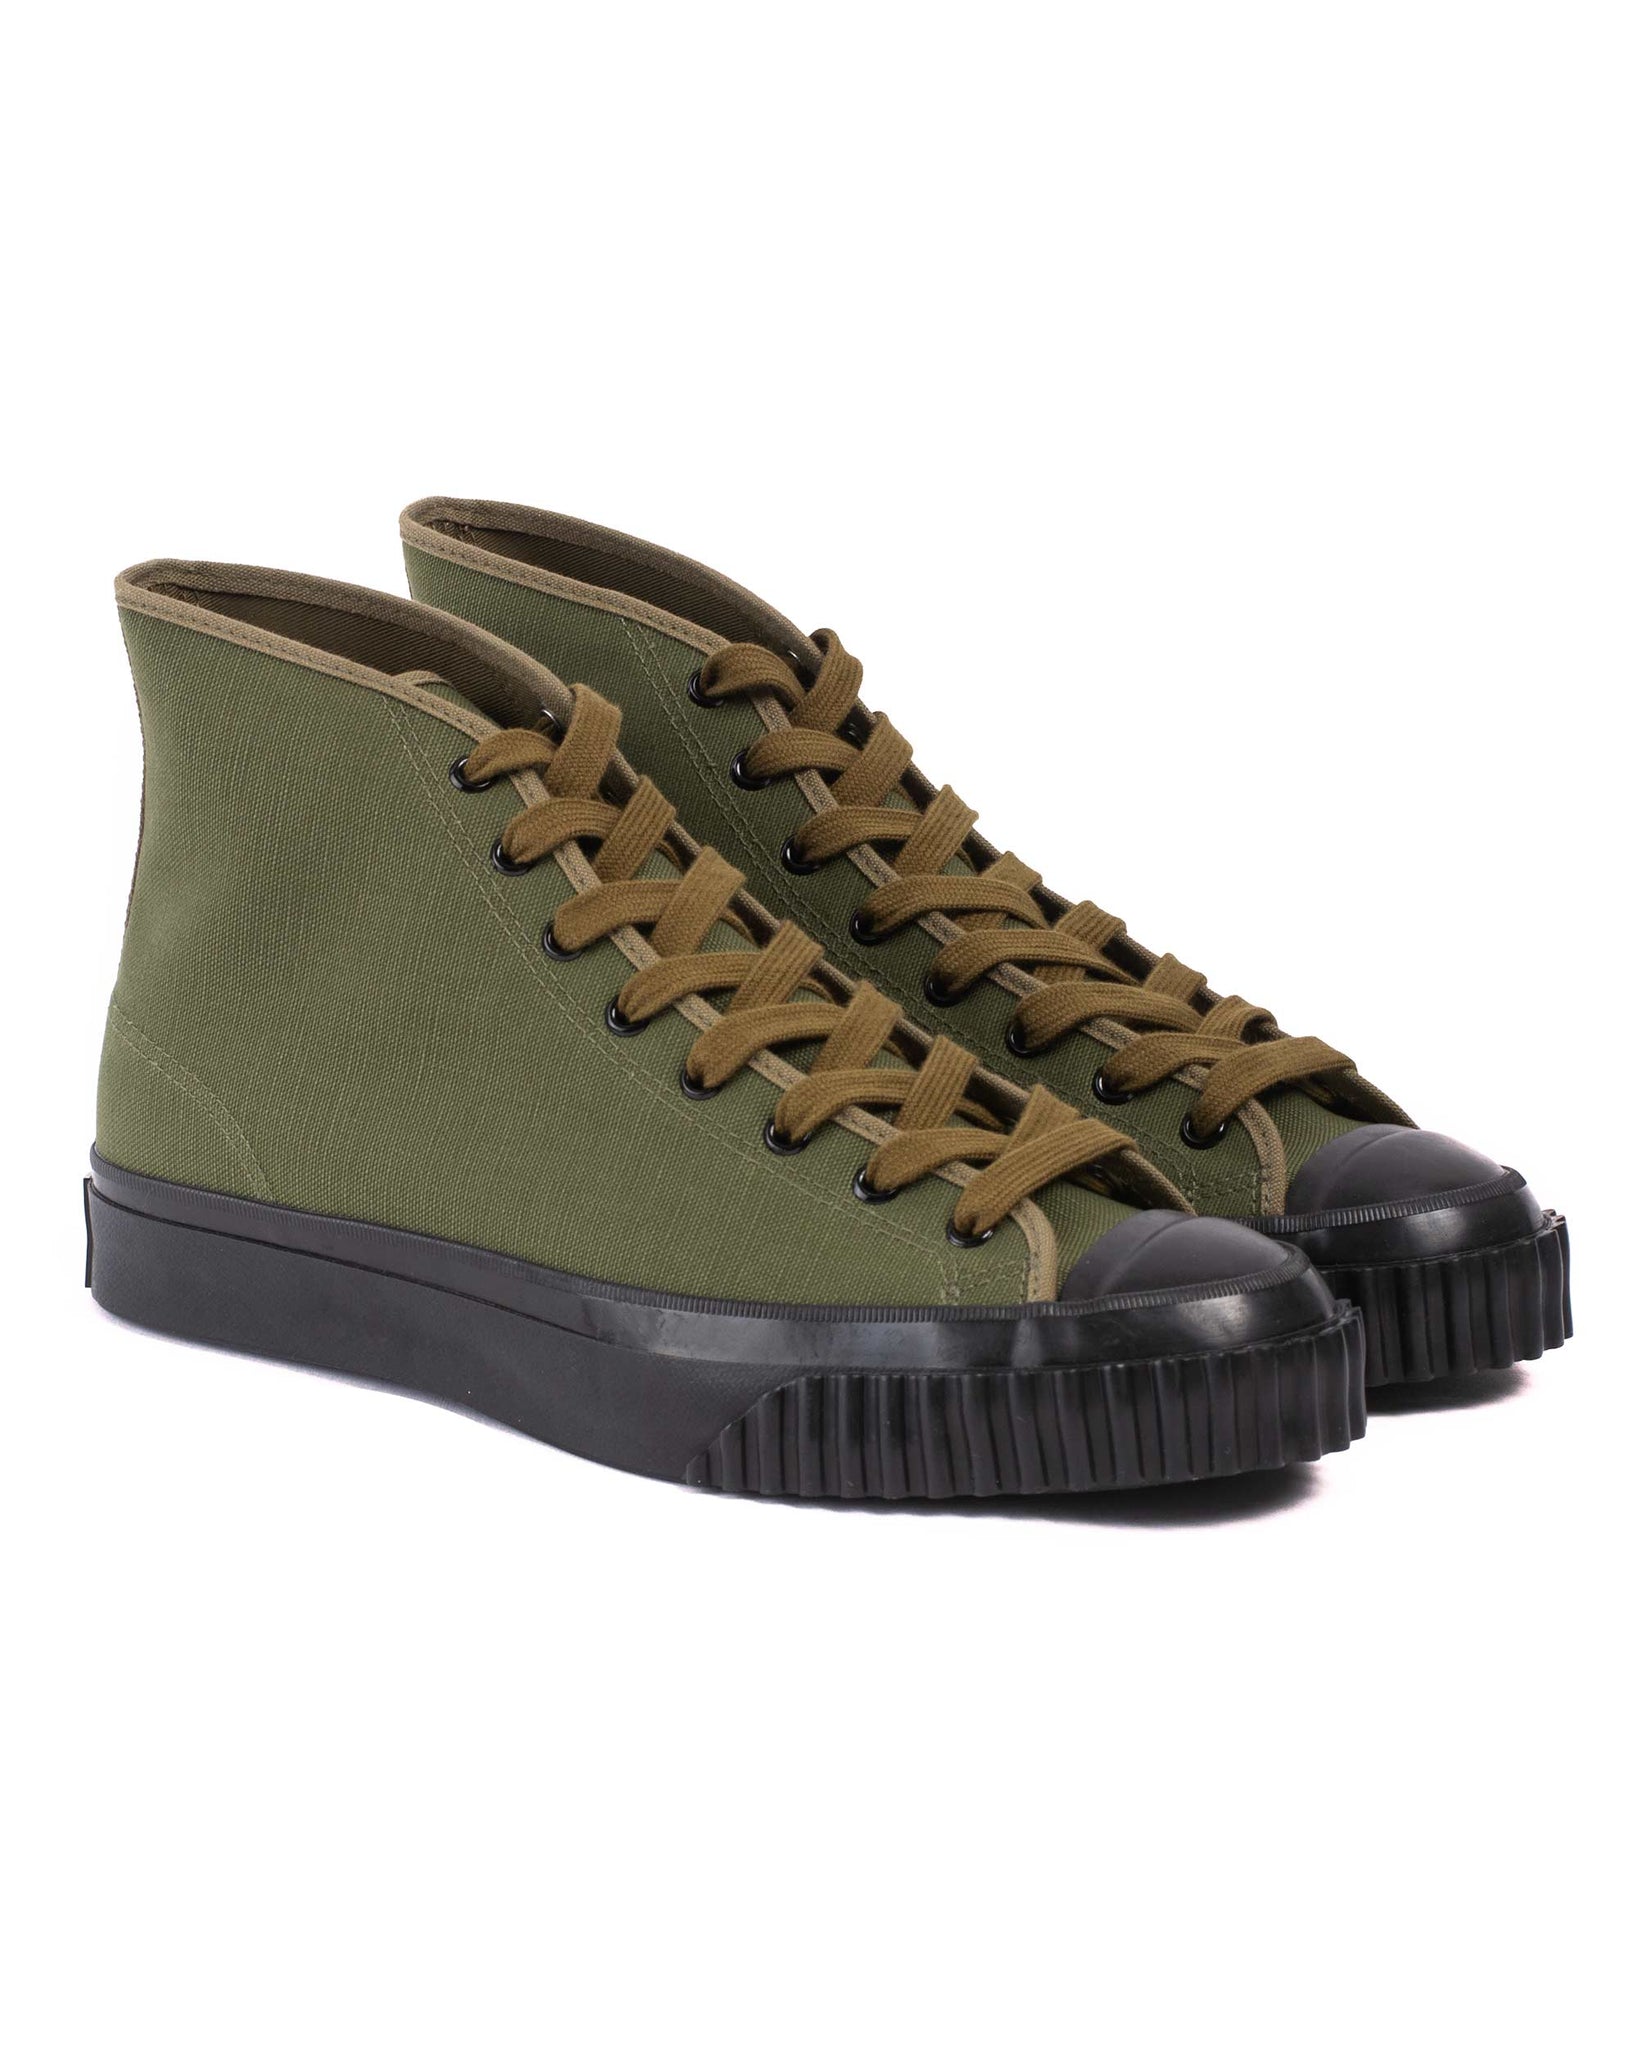 The Real McCoy's MA17010 Military Canvas Training Shoes Olive Side